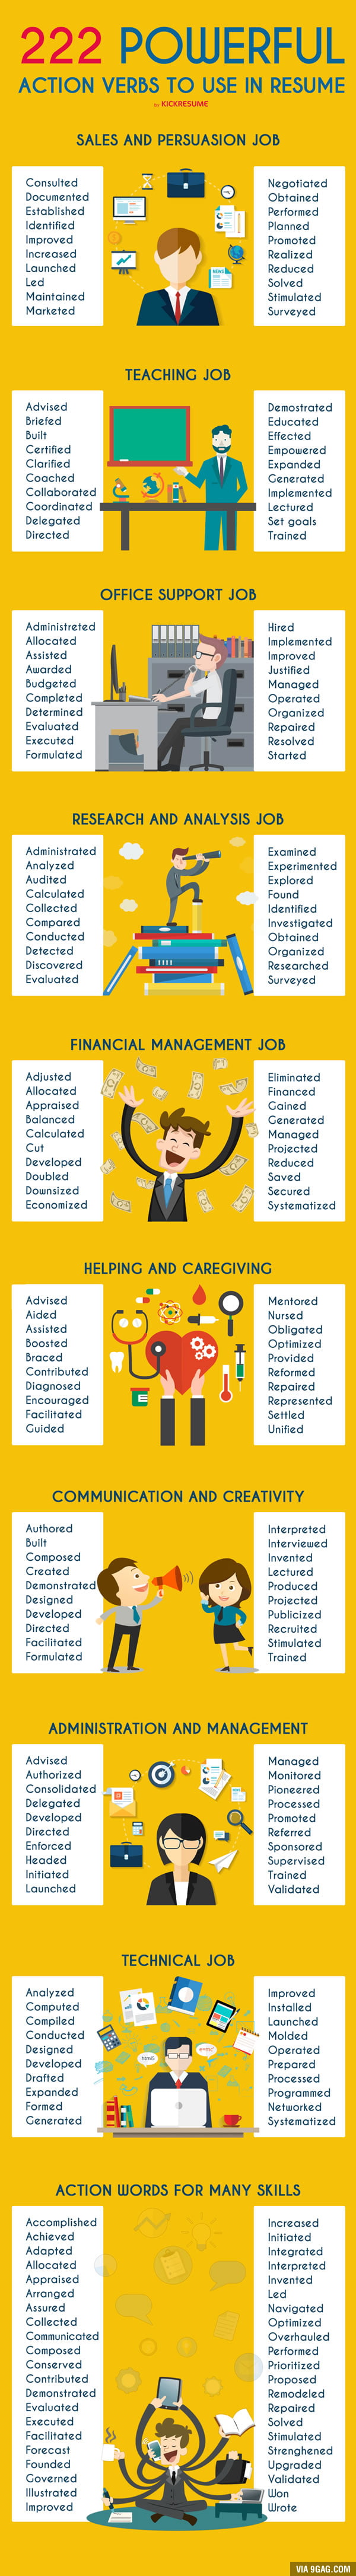 Resume Cheat Sheet: 222 Action Verbs To Use In Your New Resume